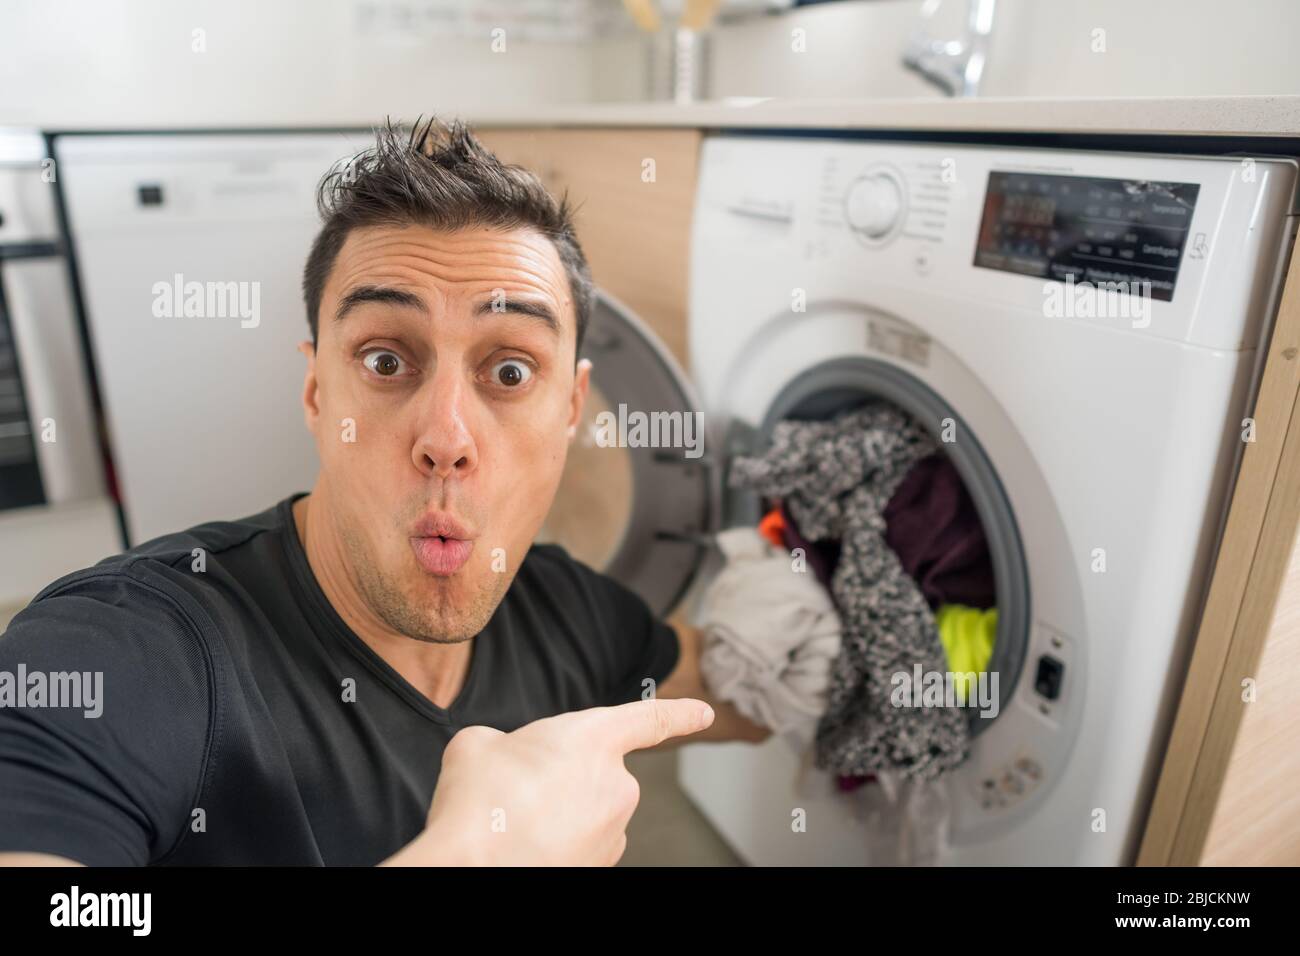 https://c8.alamy.com/comp/2BJCKNW/man-putting-clothes-in-the-washing-machine-in-the-kitchen-worried-because-he-has-to-wash-a-lot-of-clothes-close-up-2BJCKNW.jpg